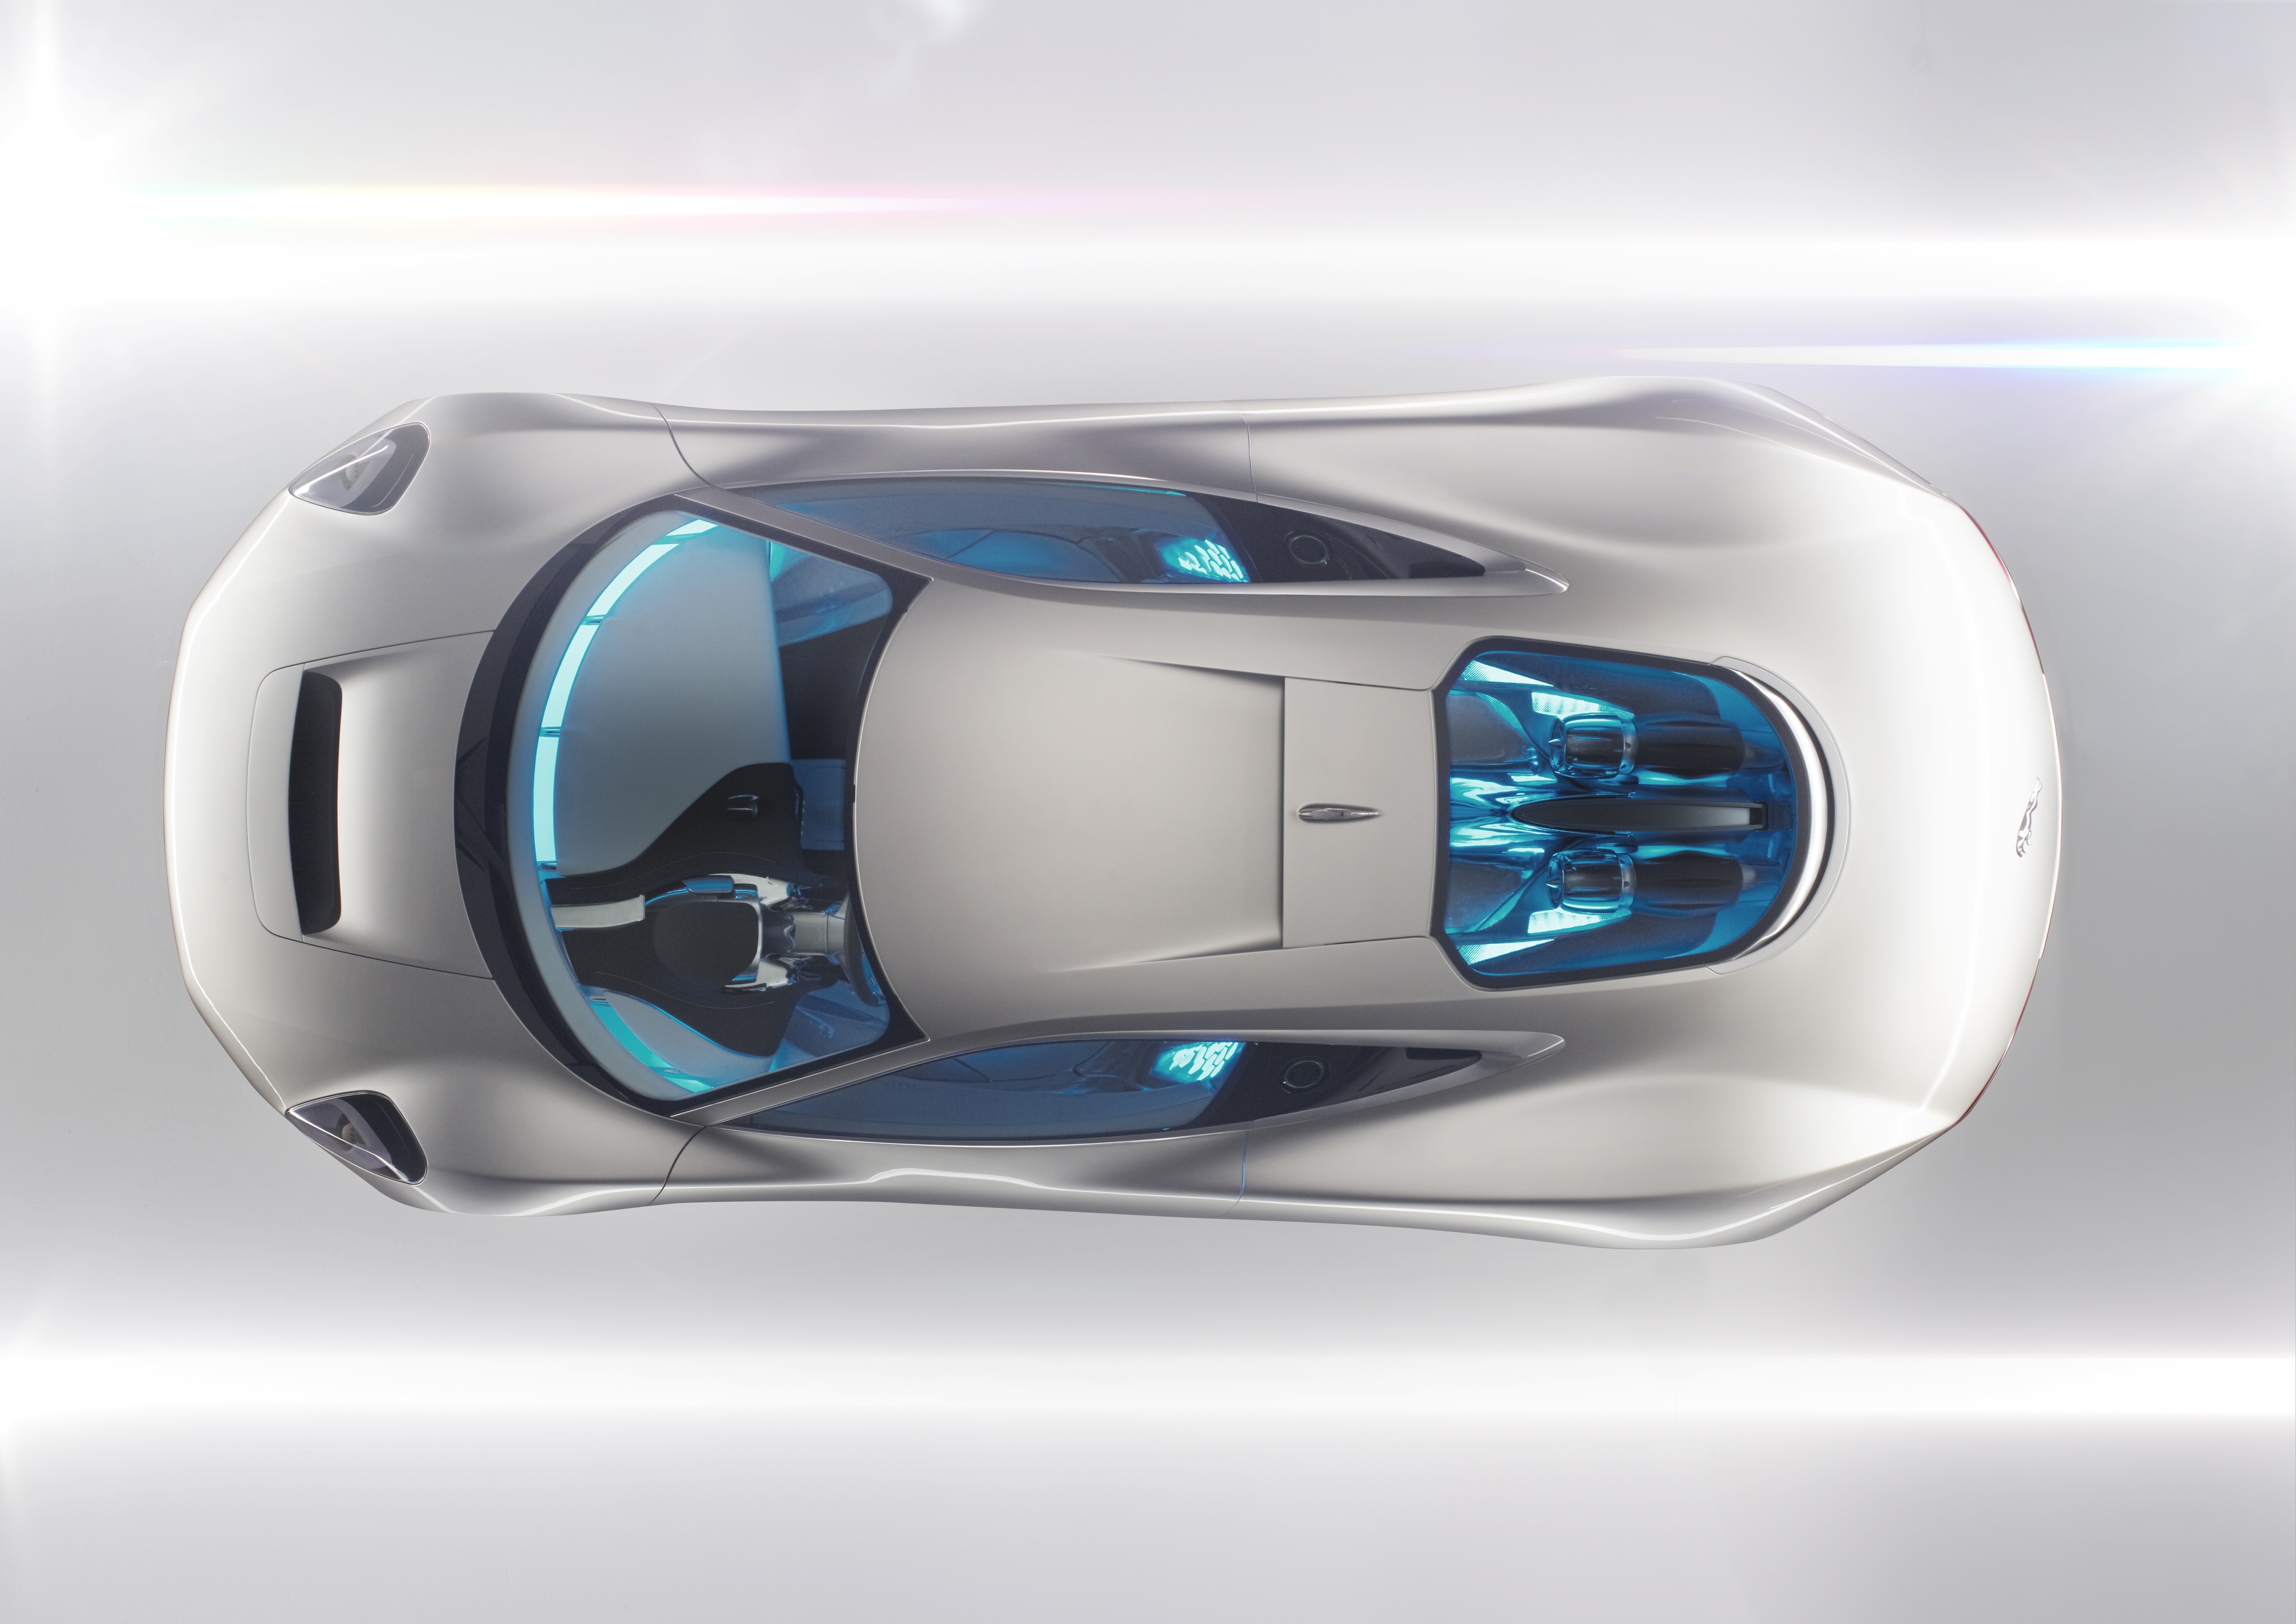 The C-X75 concept car features a gas-turbine developed by Bladon Jets